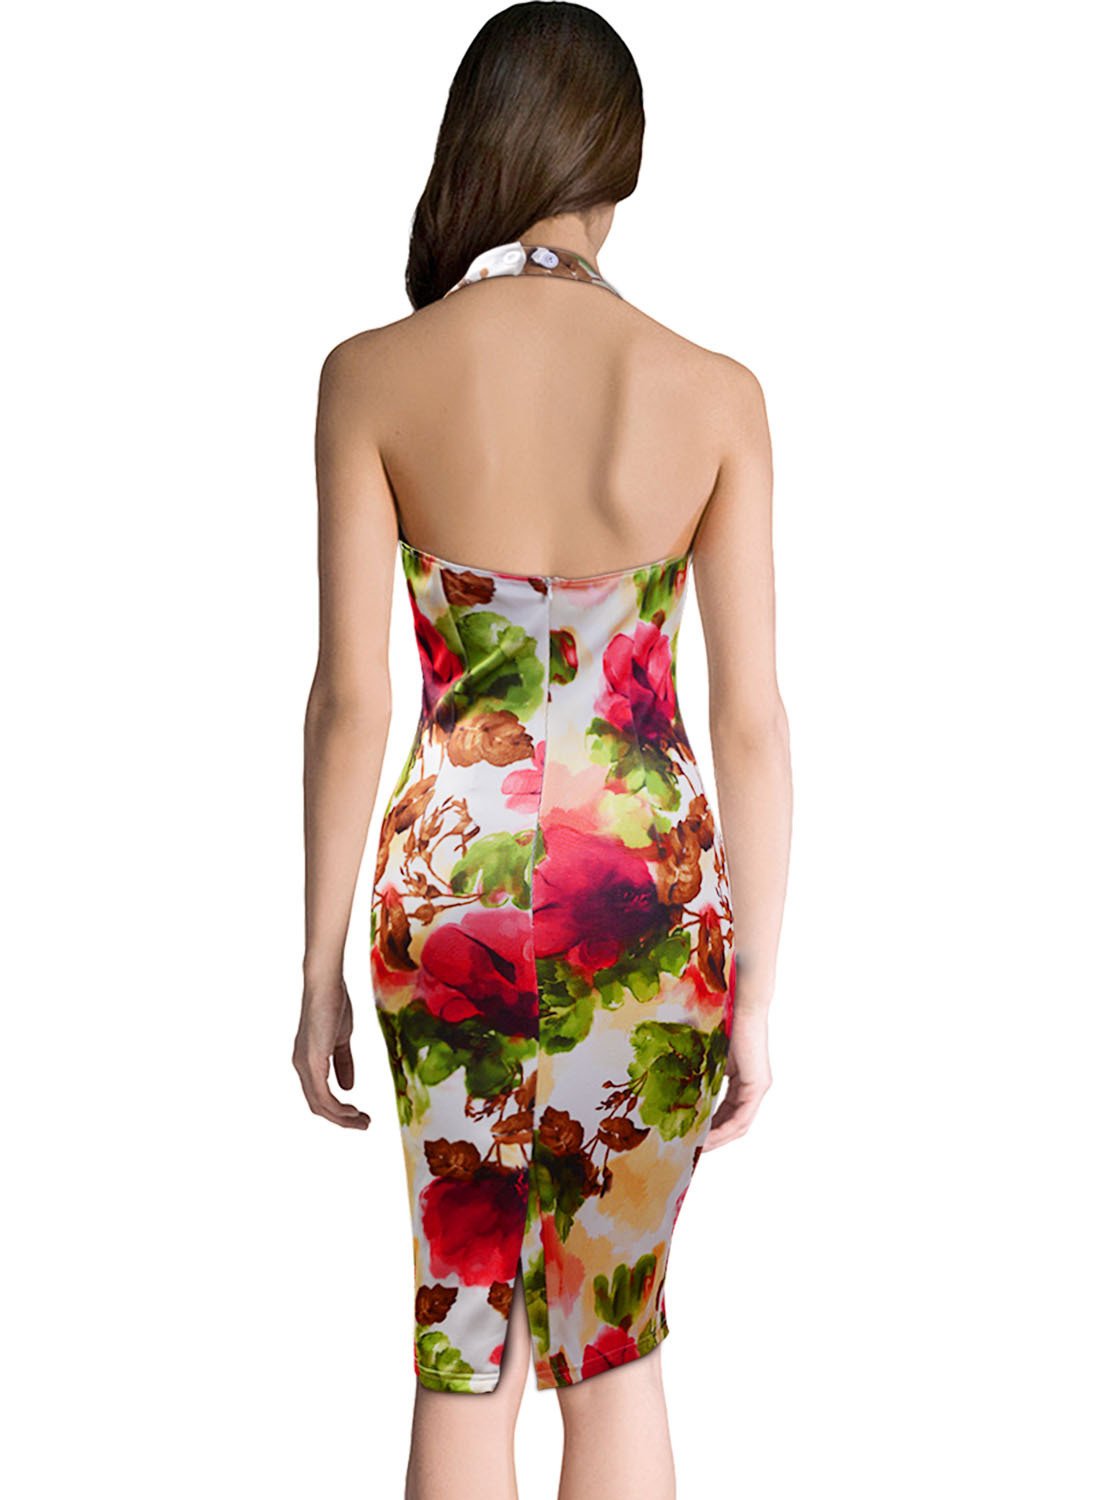 Sexy Halter Backless Sleeveless Flower Print Bodycon A-line Knee-length Dress - Meet Yours Fashion - 4